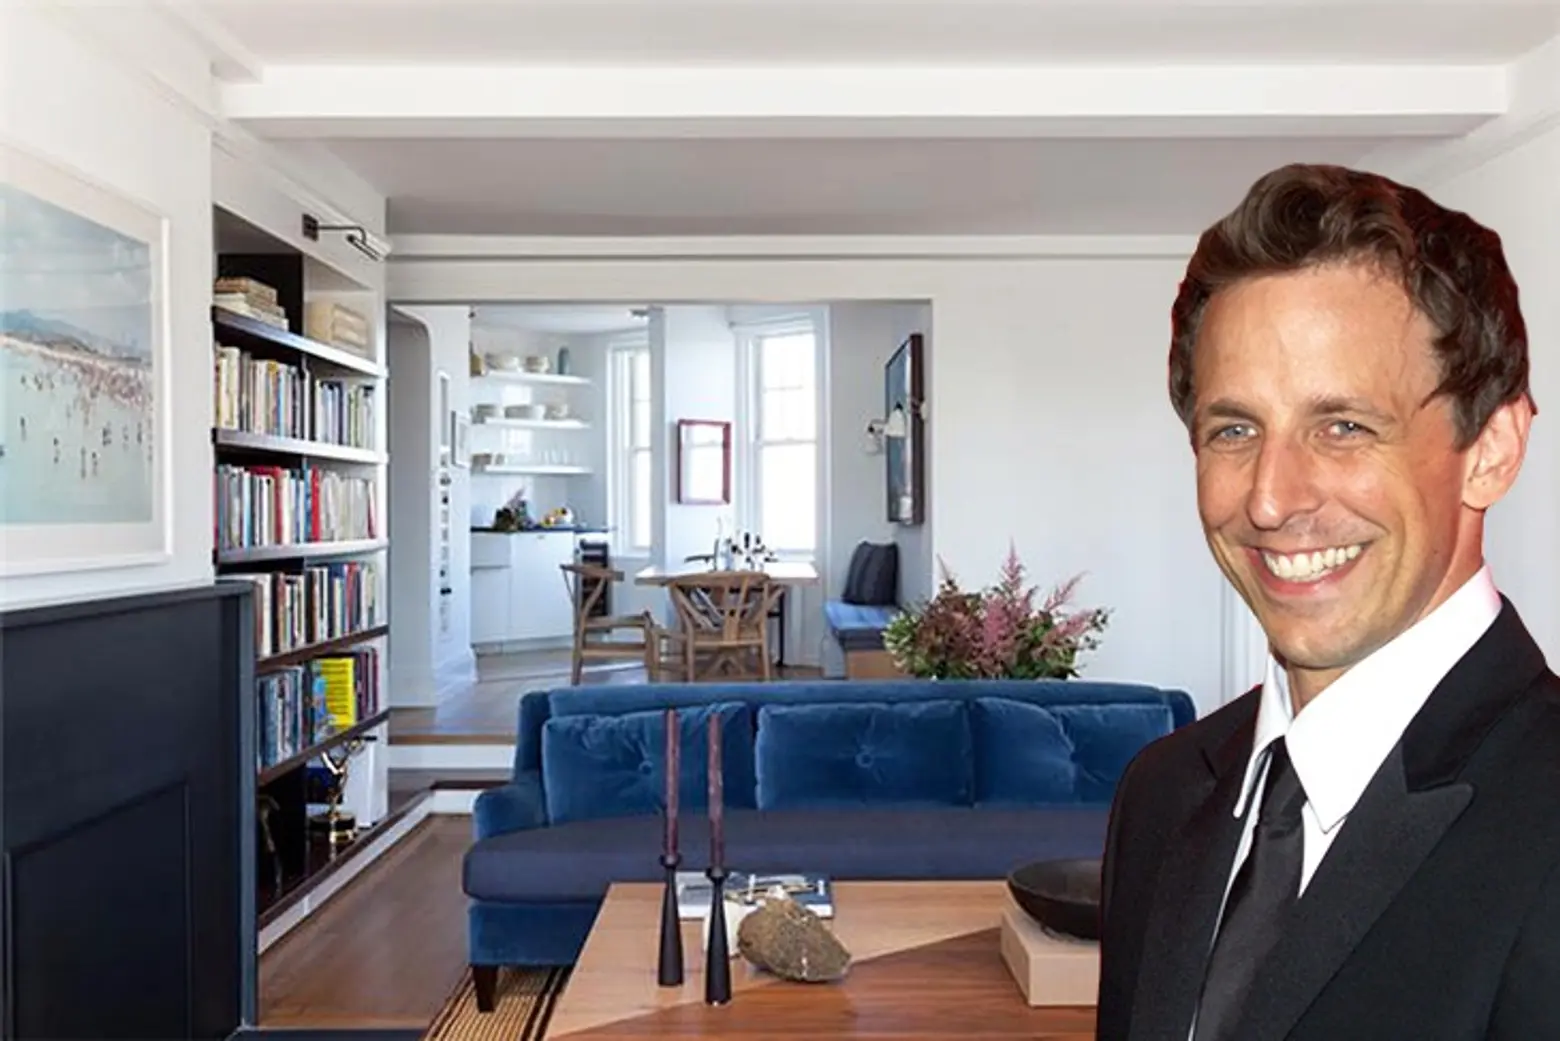 Seth Meyers’ $4.5M West Village condo is in contract after only a month